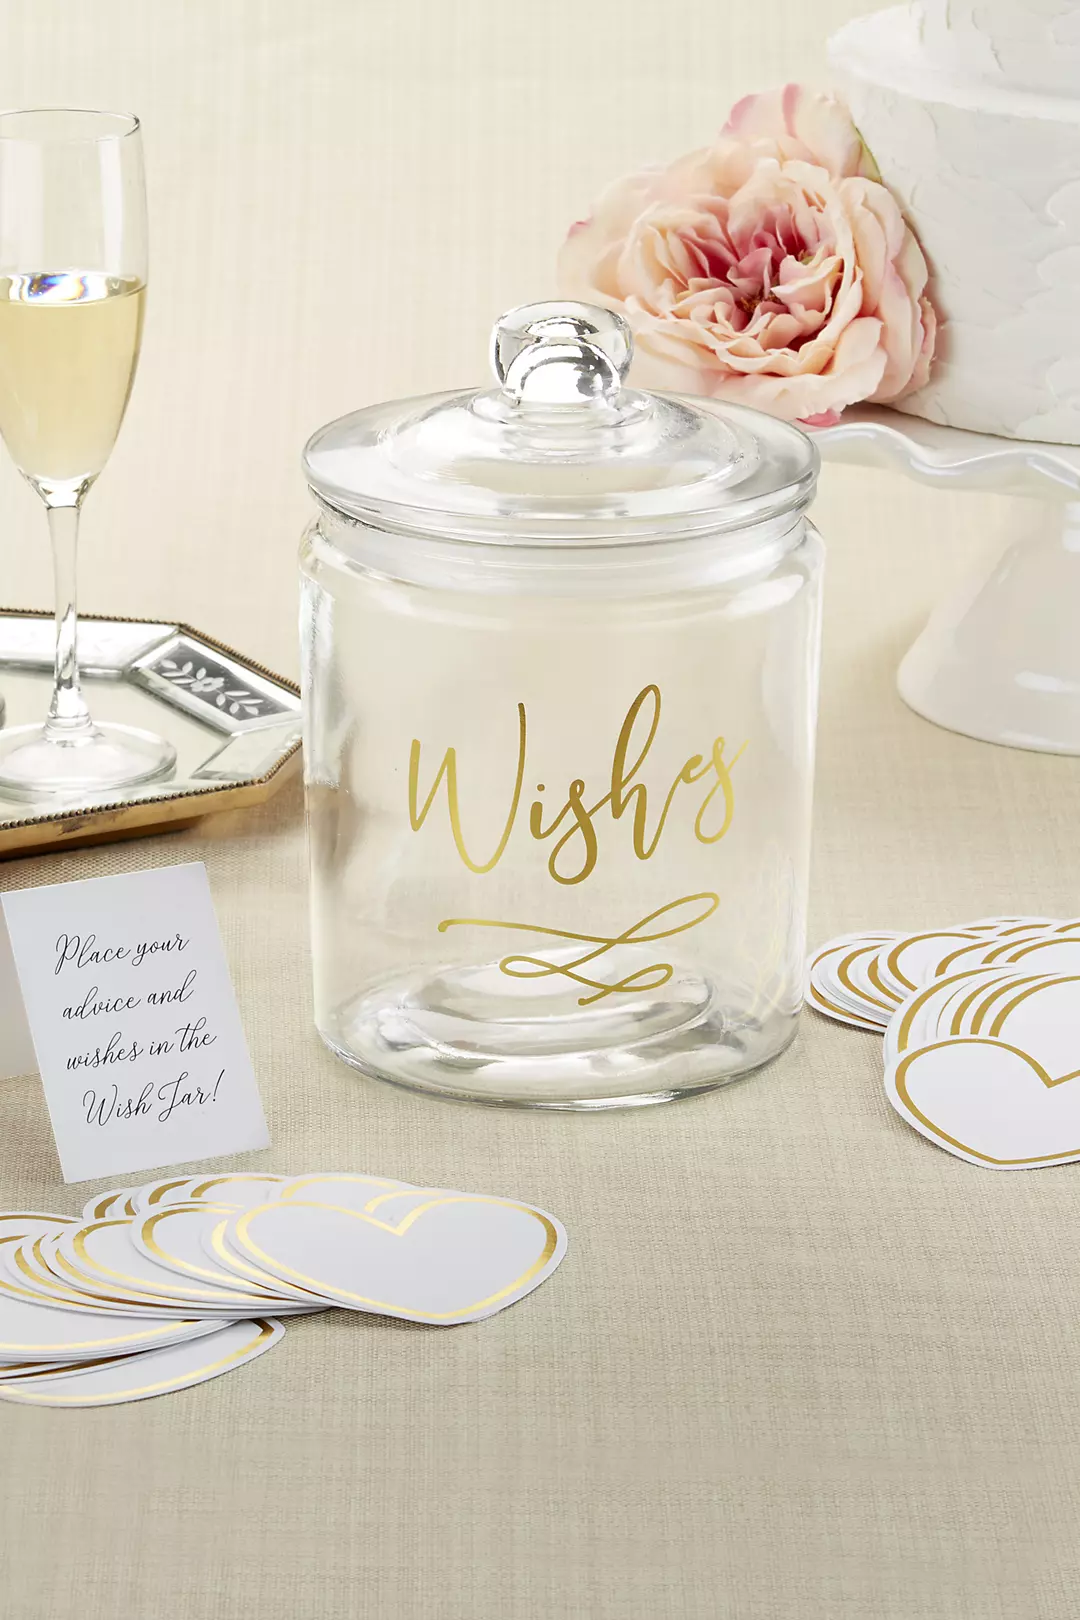 Wish Jar with Heart Shaped Cards Image 2